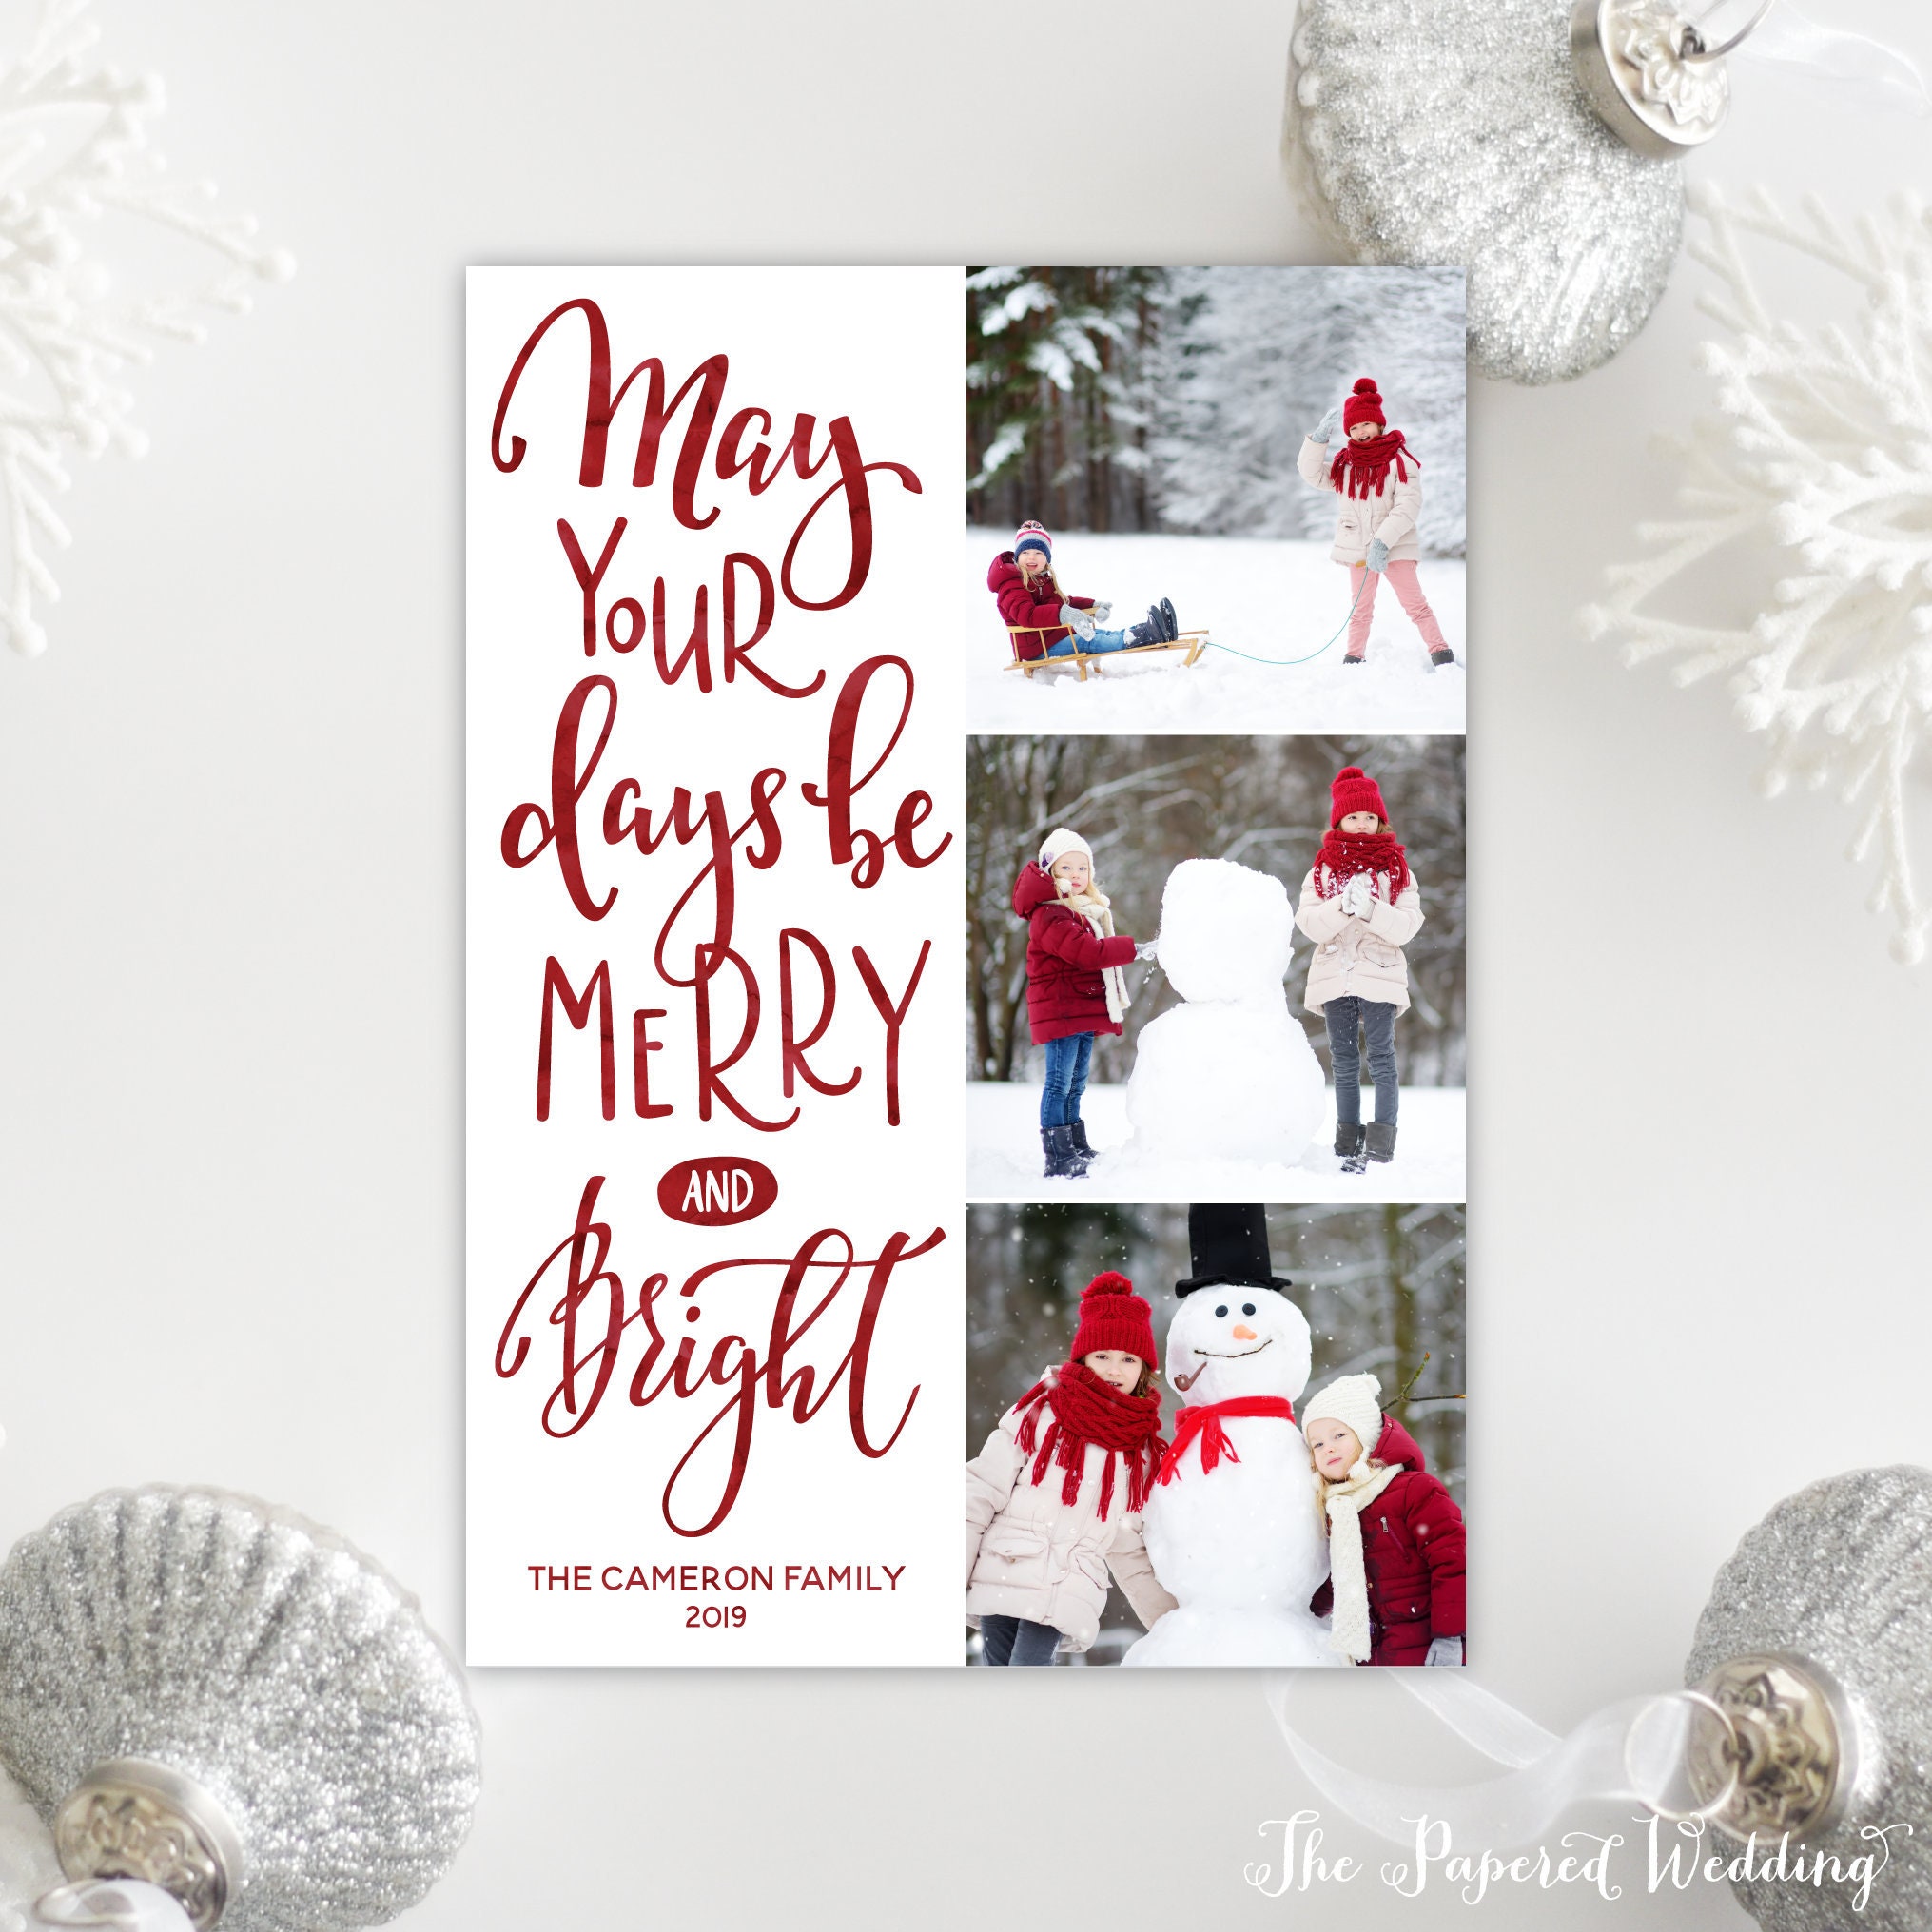 Printable Or Printed Photo Holiday Cards in Red Watercolor - May Your Days Be Merry & Bright Christmas With Three Pictures 099 P3